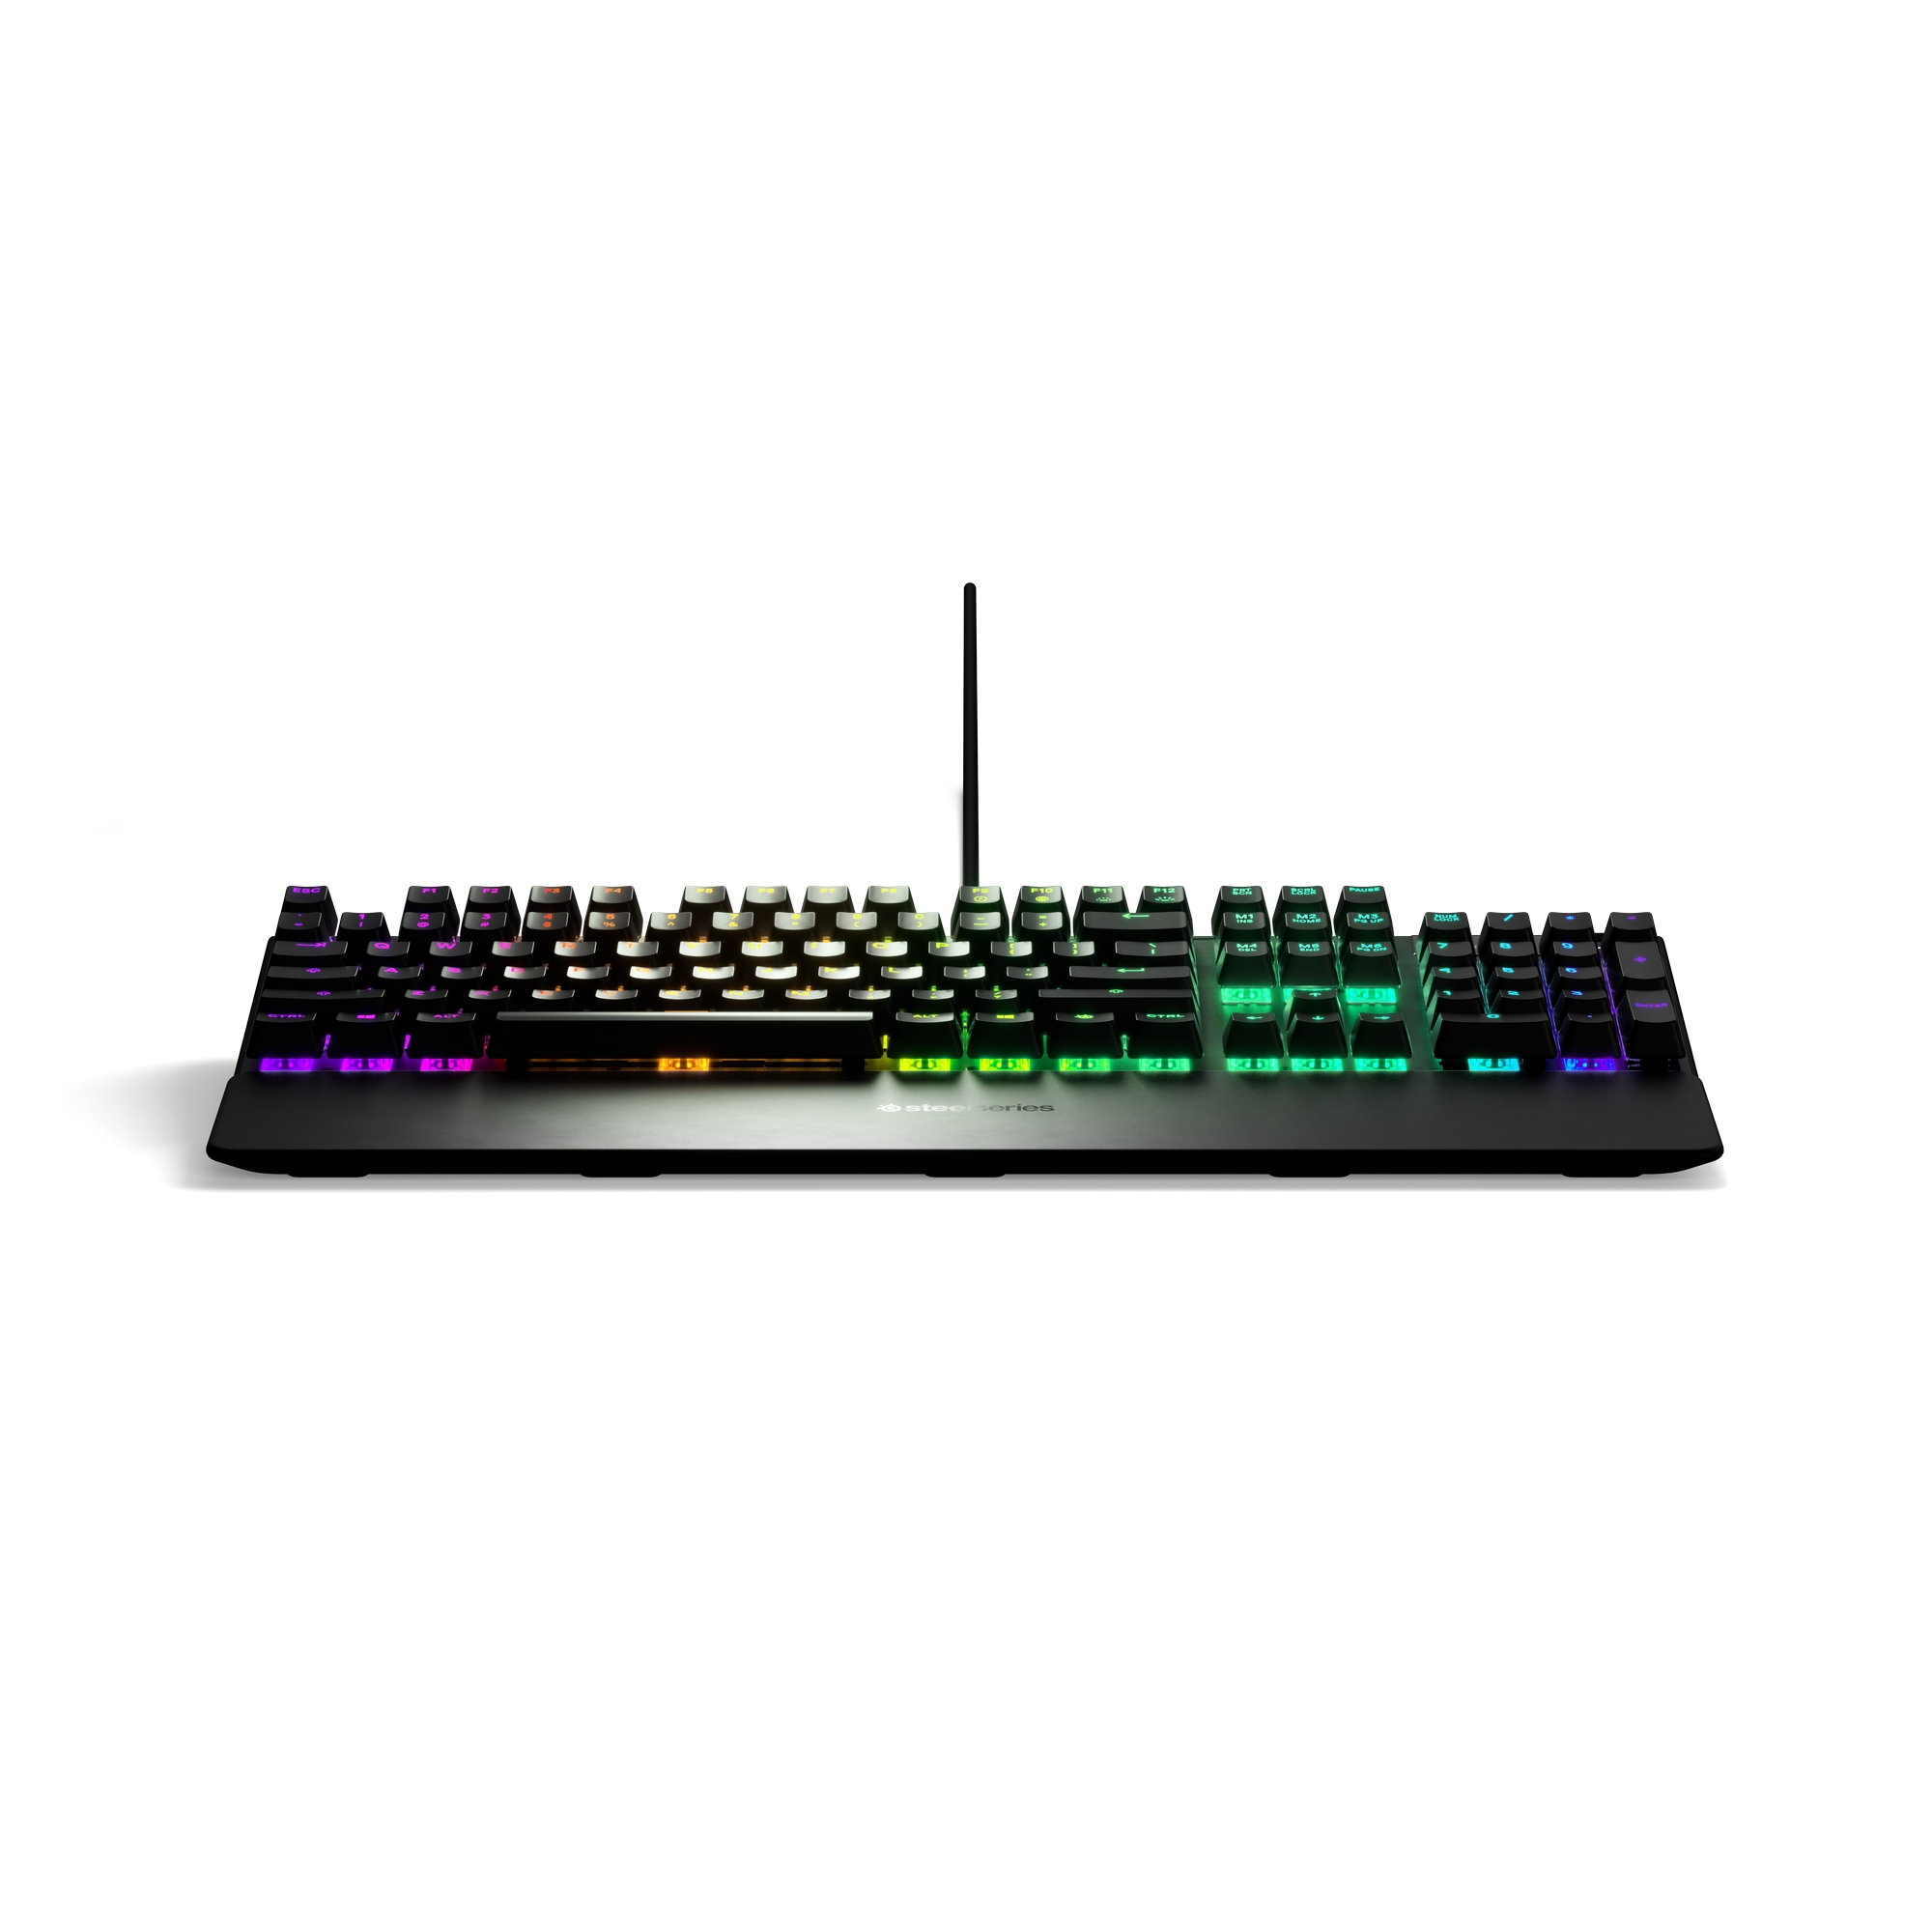 SteelSeries's RGB Apex 7 TKL Mechanical Gaming Keyboard starts from $80   lows